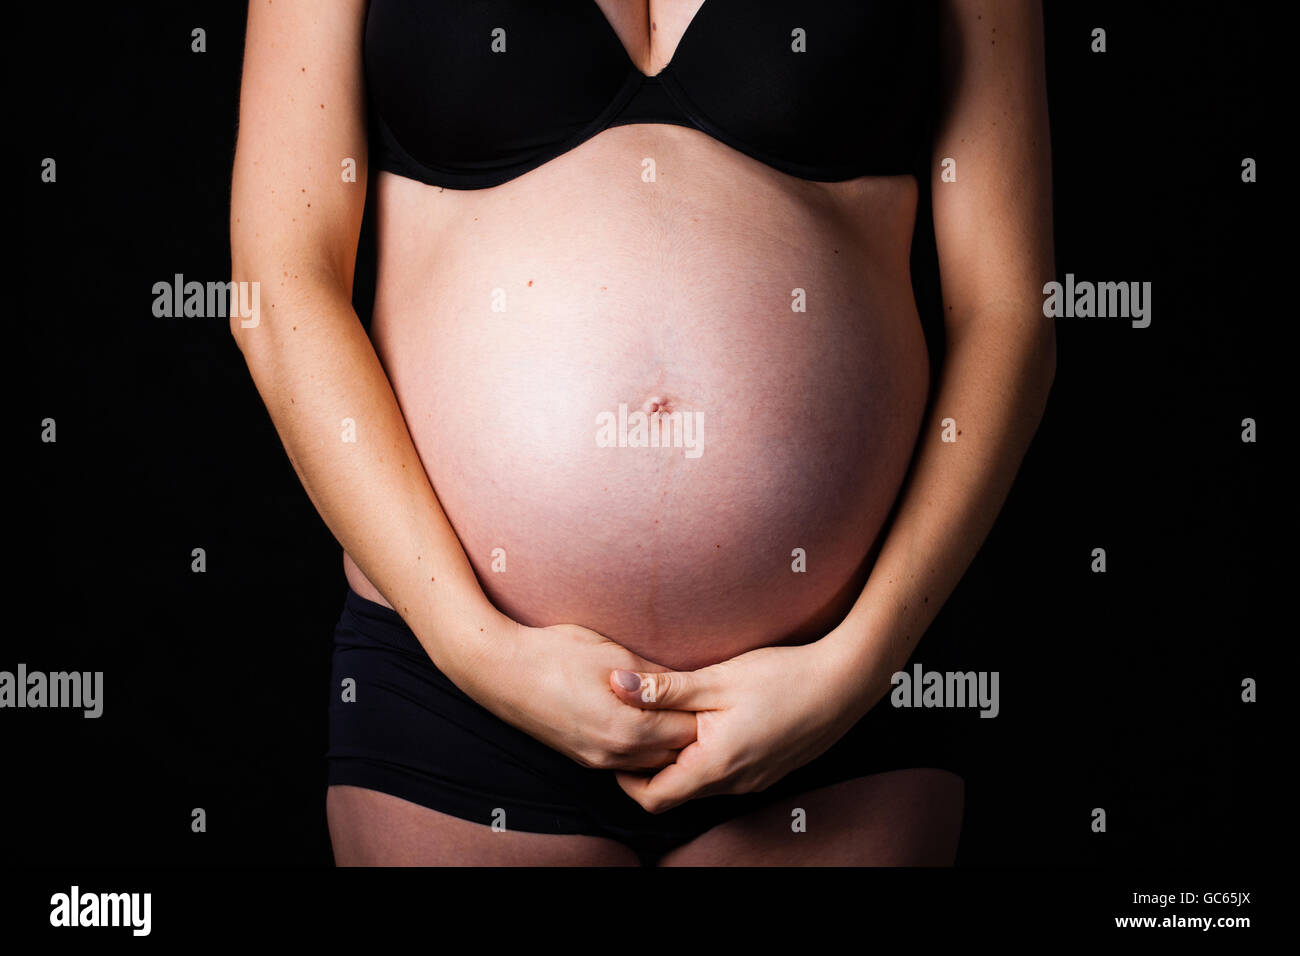 Pregnancy belly with her hands under the belly. Dark tone. Stock Photo